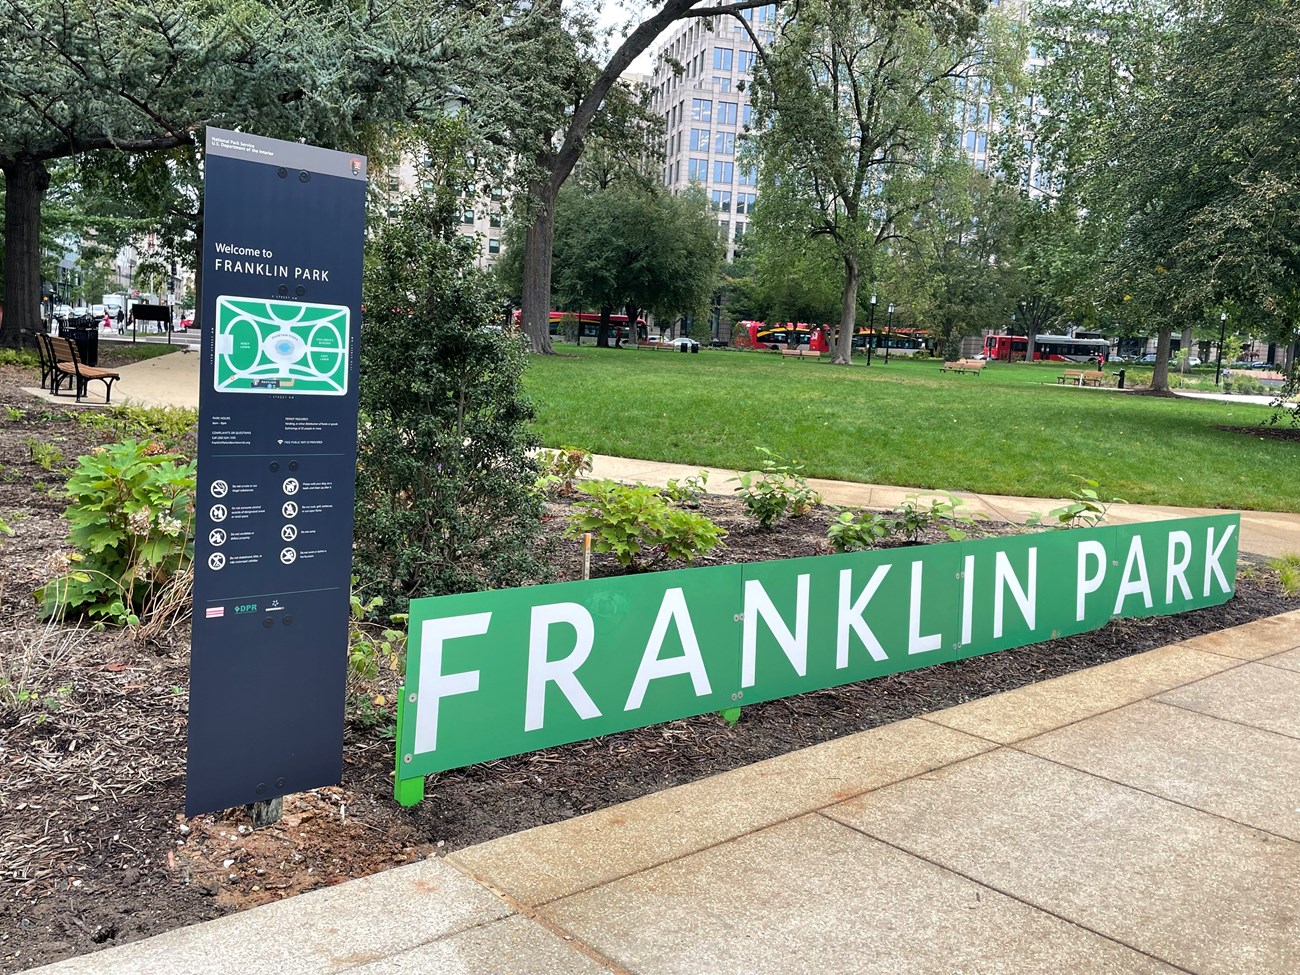 Franklin Park Sign with green grass and trees and busses in the background.